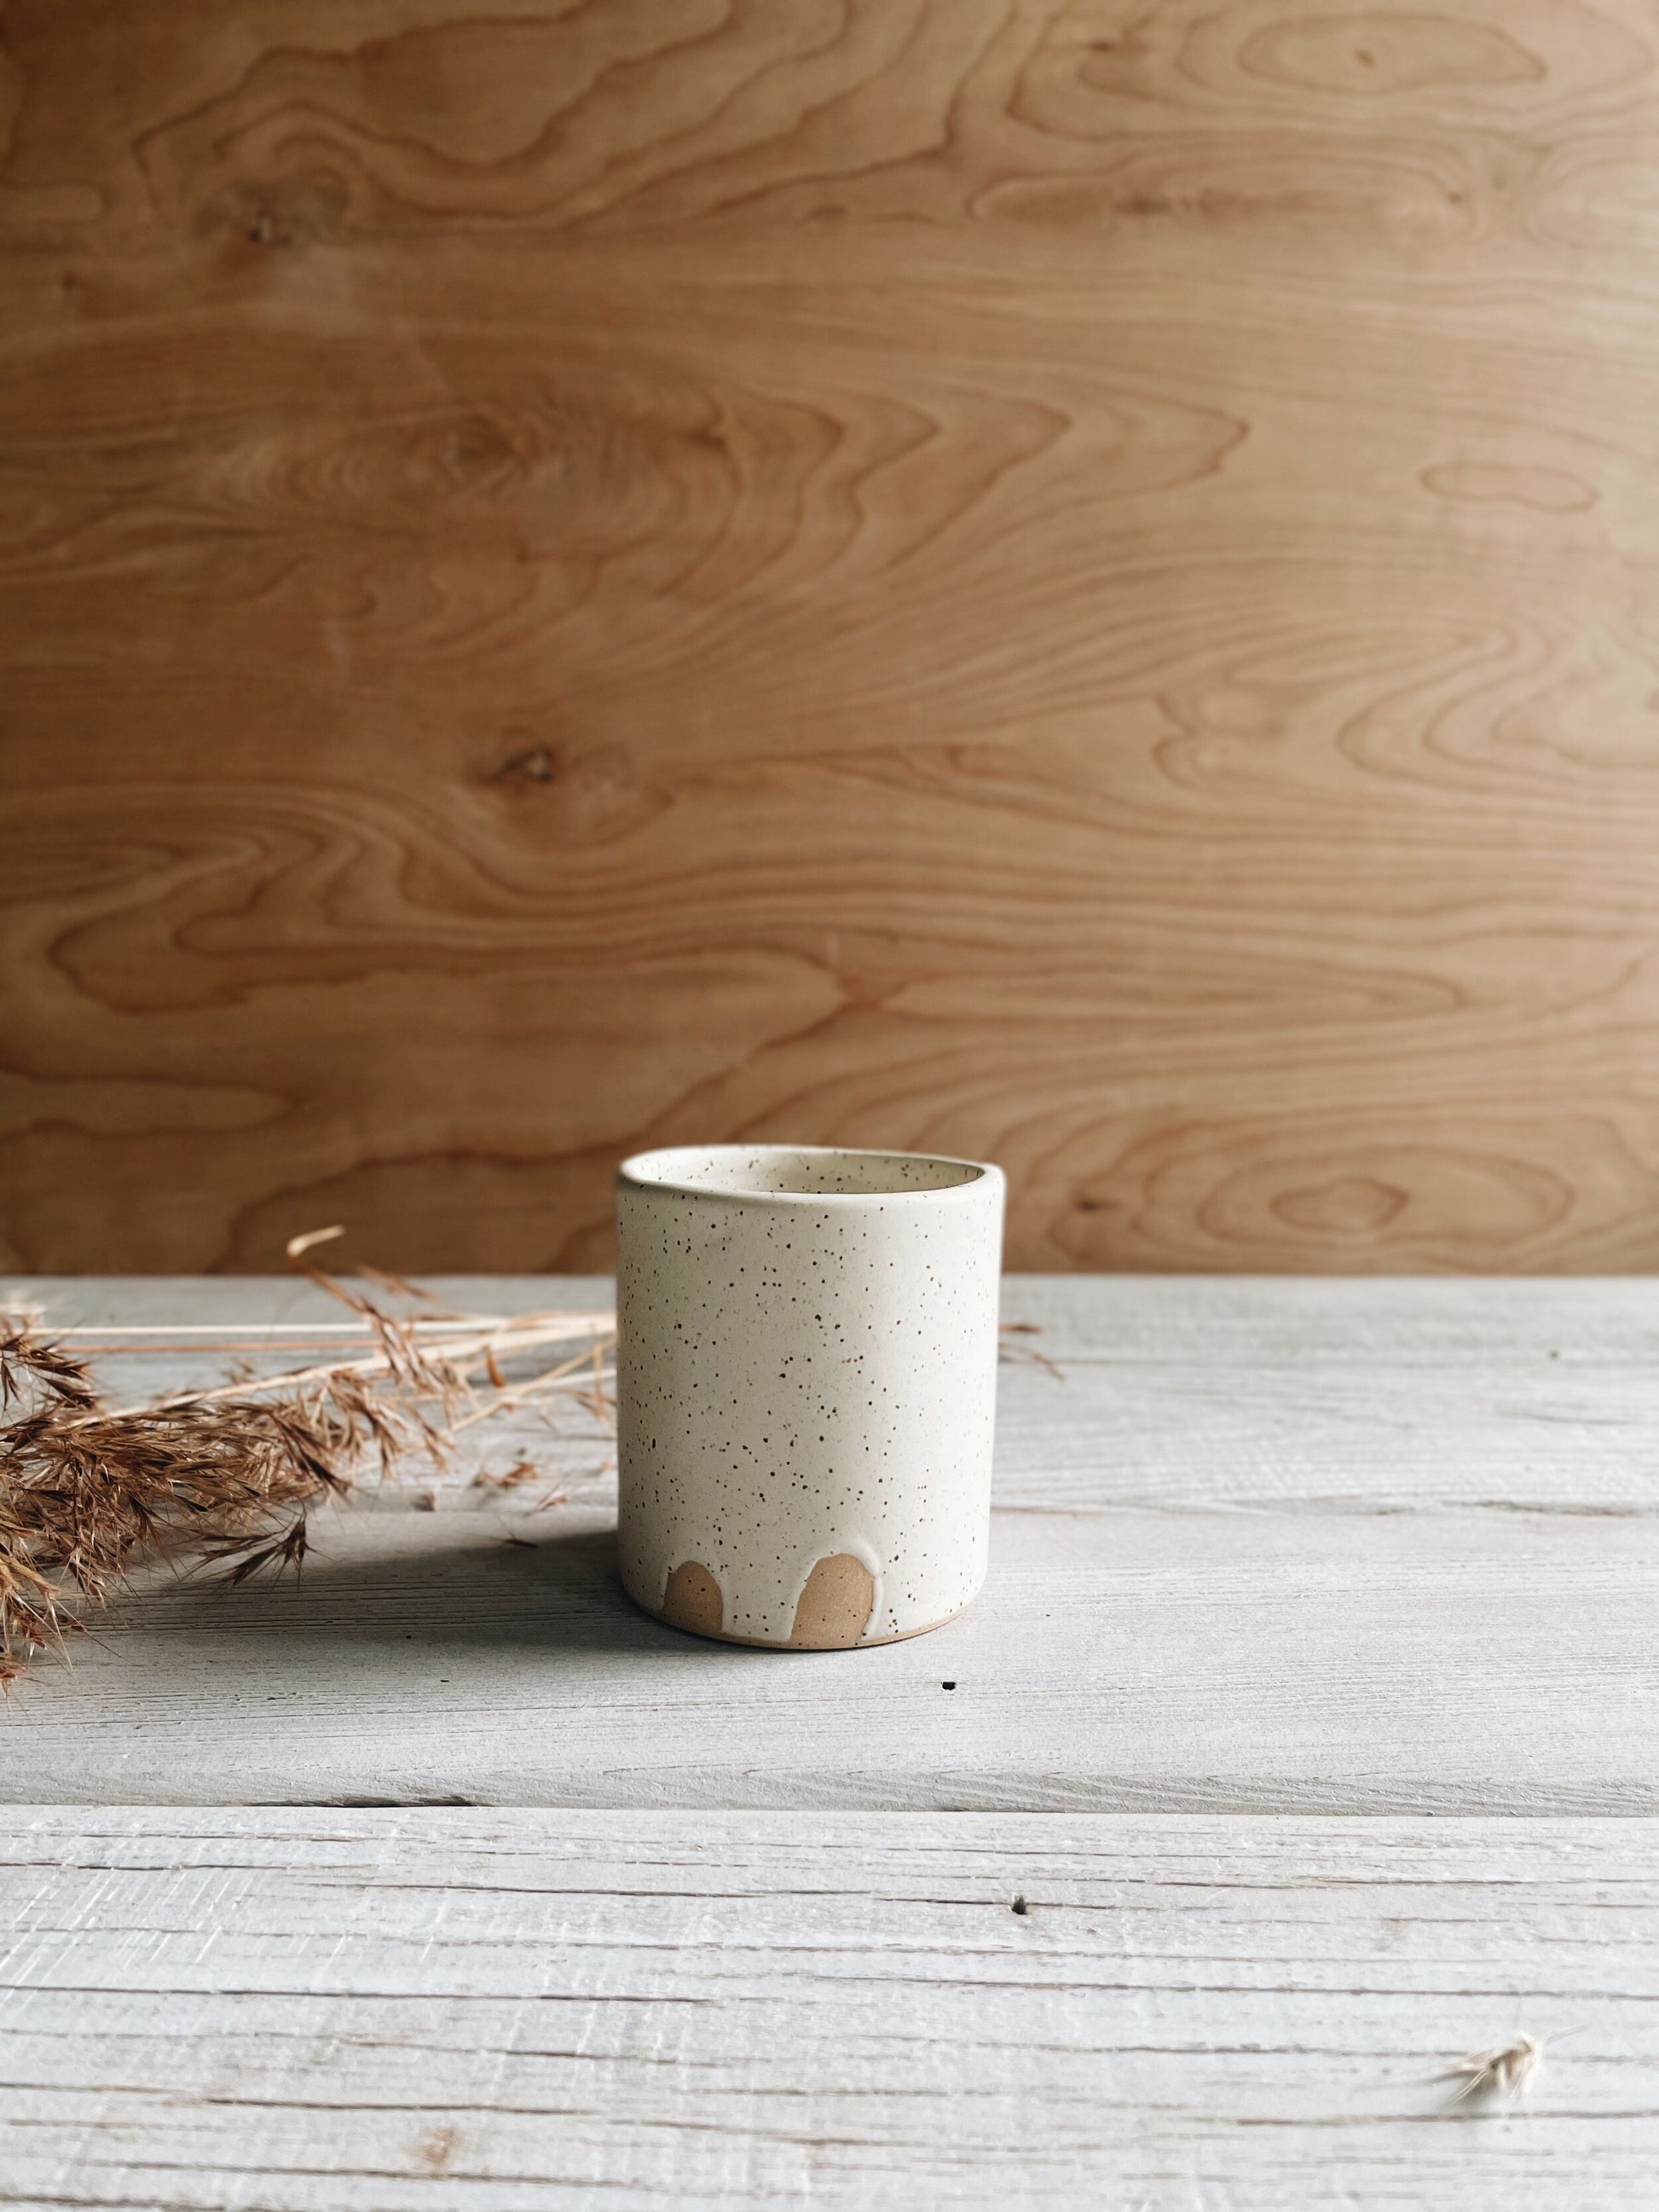 Speckled ceramic cup on wood background